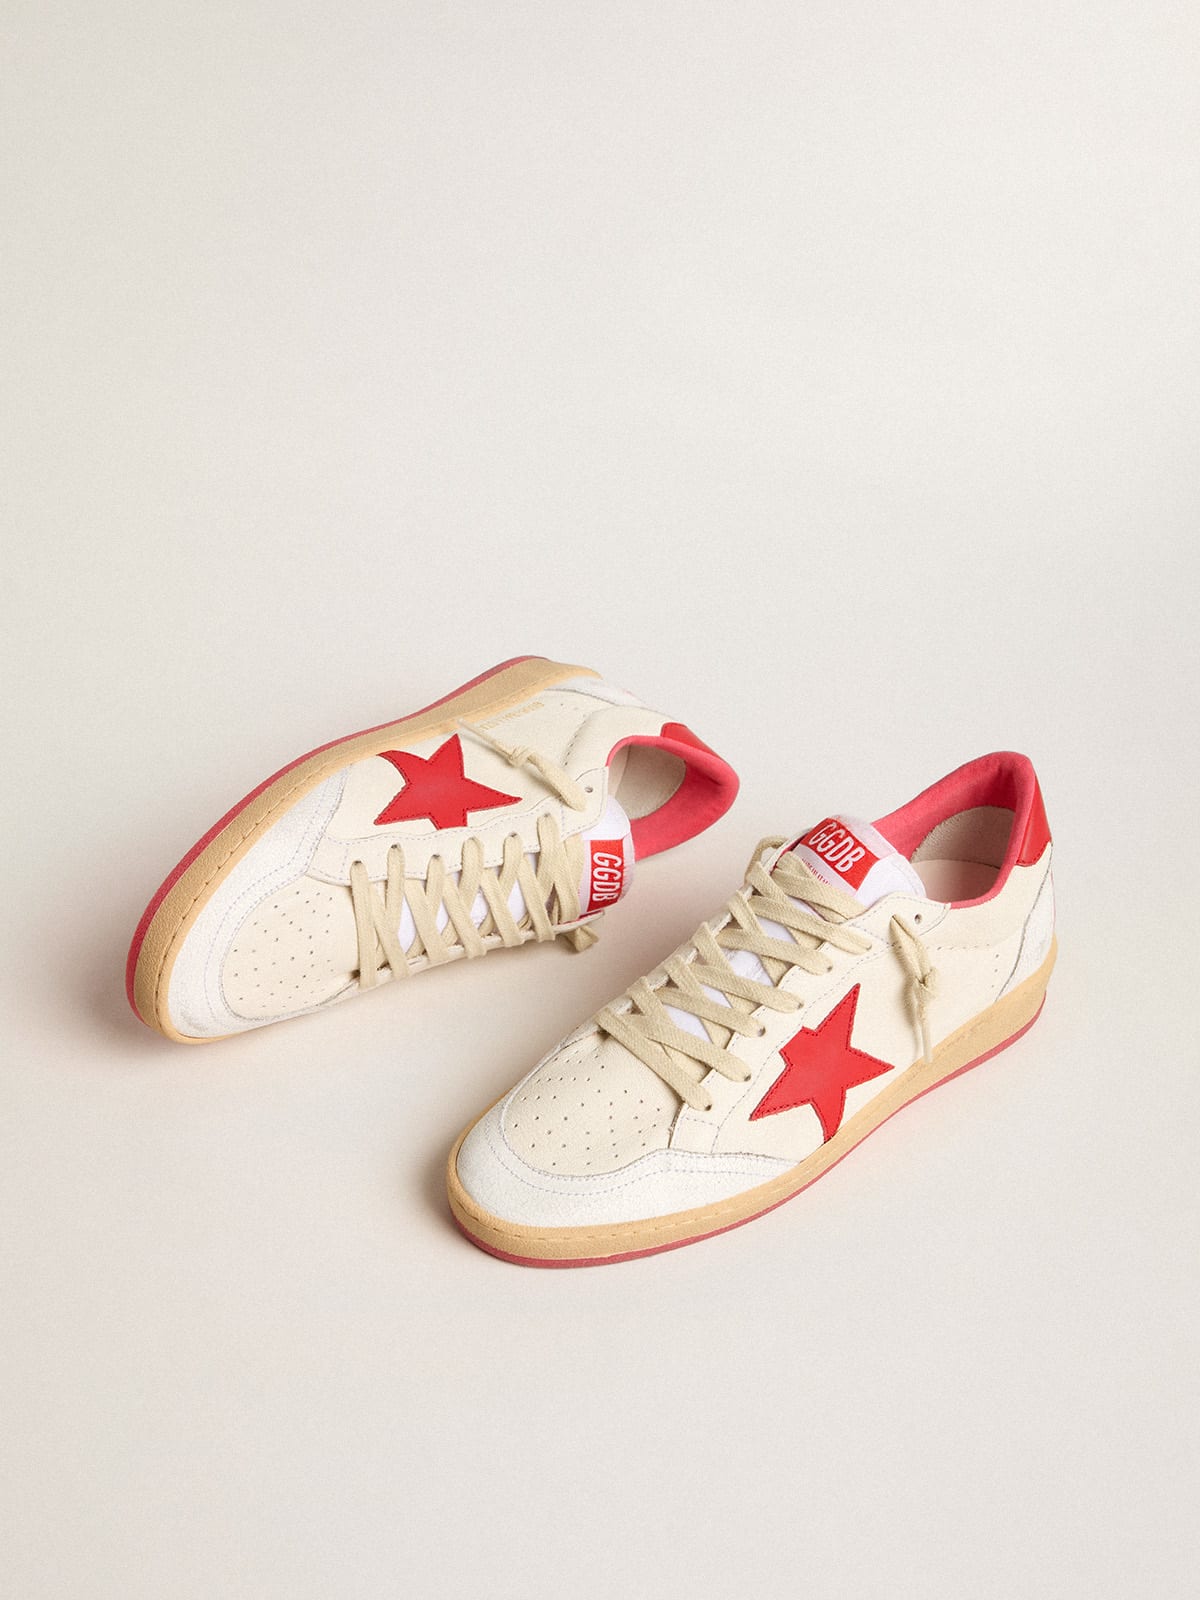 Golden Goose - Women’s Ball Star  Wishes in white leather with a red star and heel tab in 